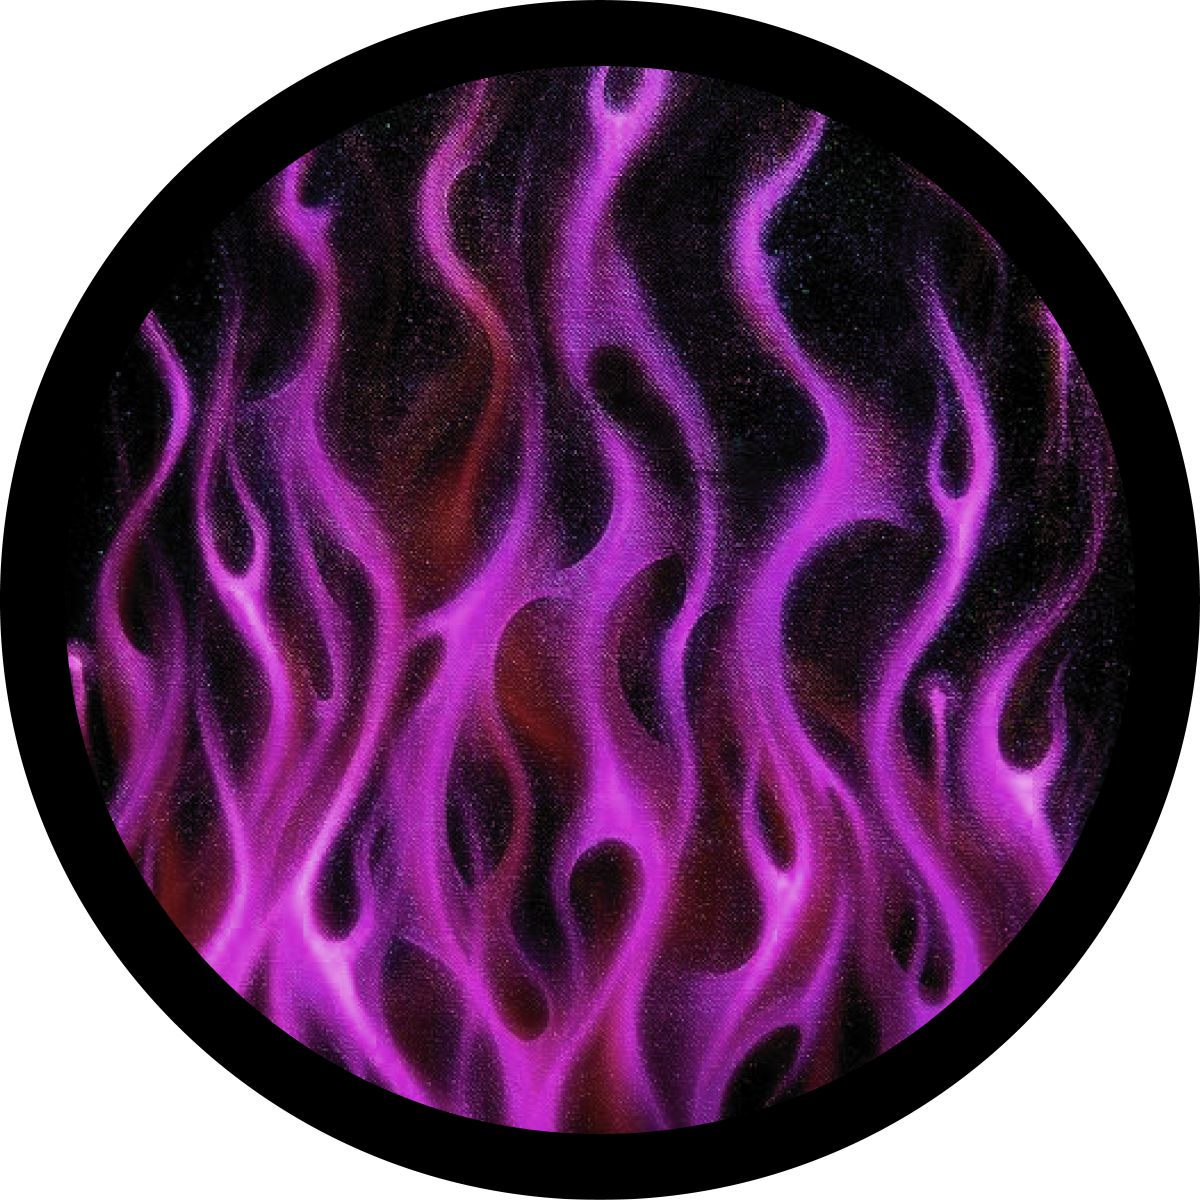 Flames in Purple or Xtreme Purple Spare Tire Cover for Jeep Wrangler, Bronco, RV, Camper, Trailer, and more